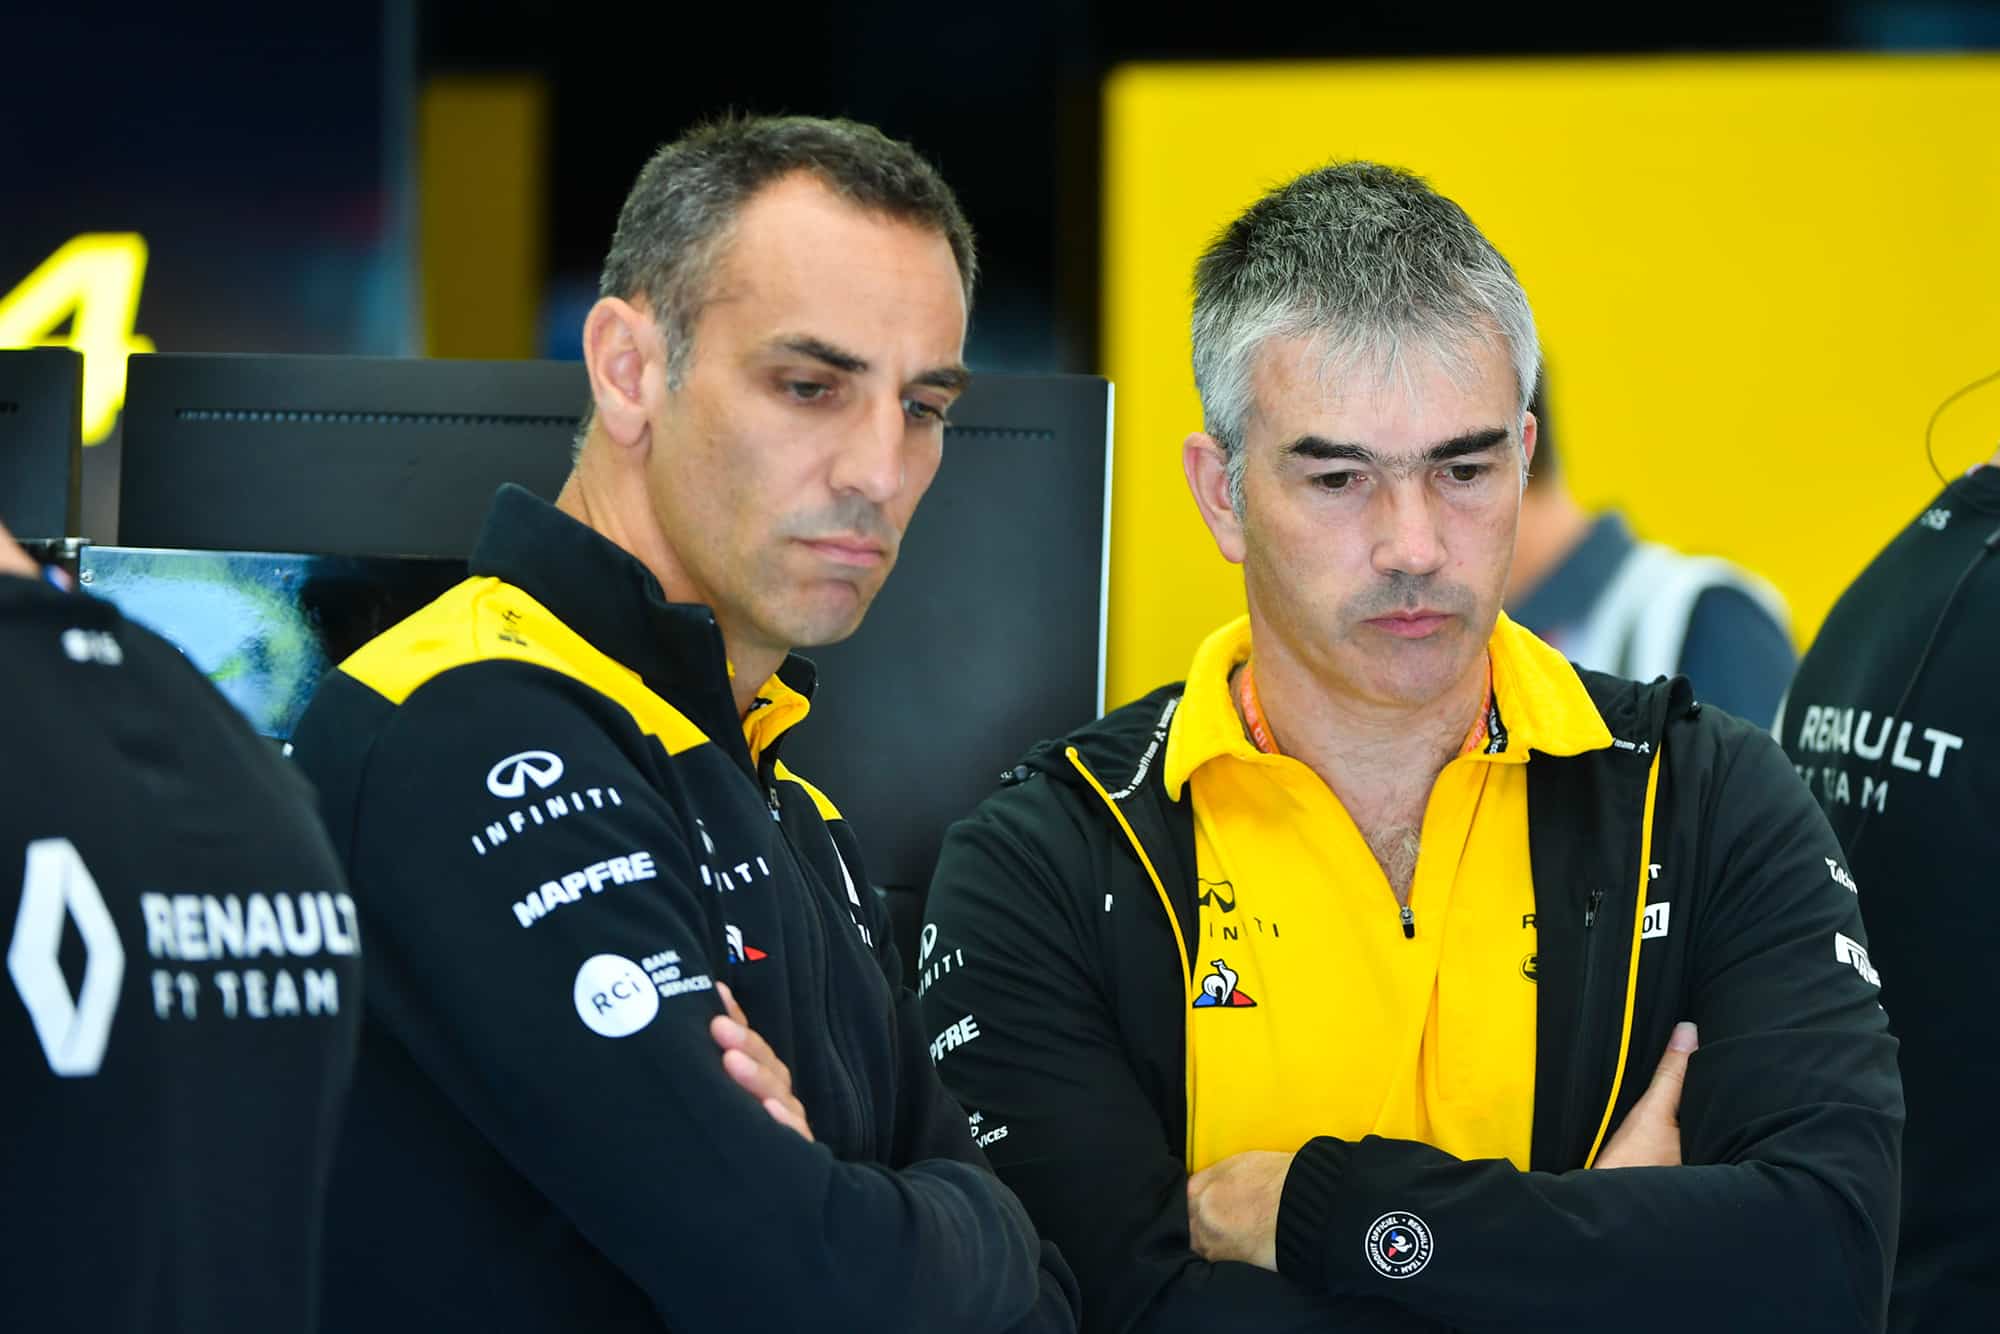 Cyril Abiteboul and Nick Chester at Renault F1 in 2019